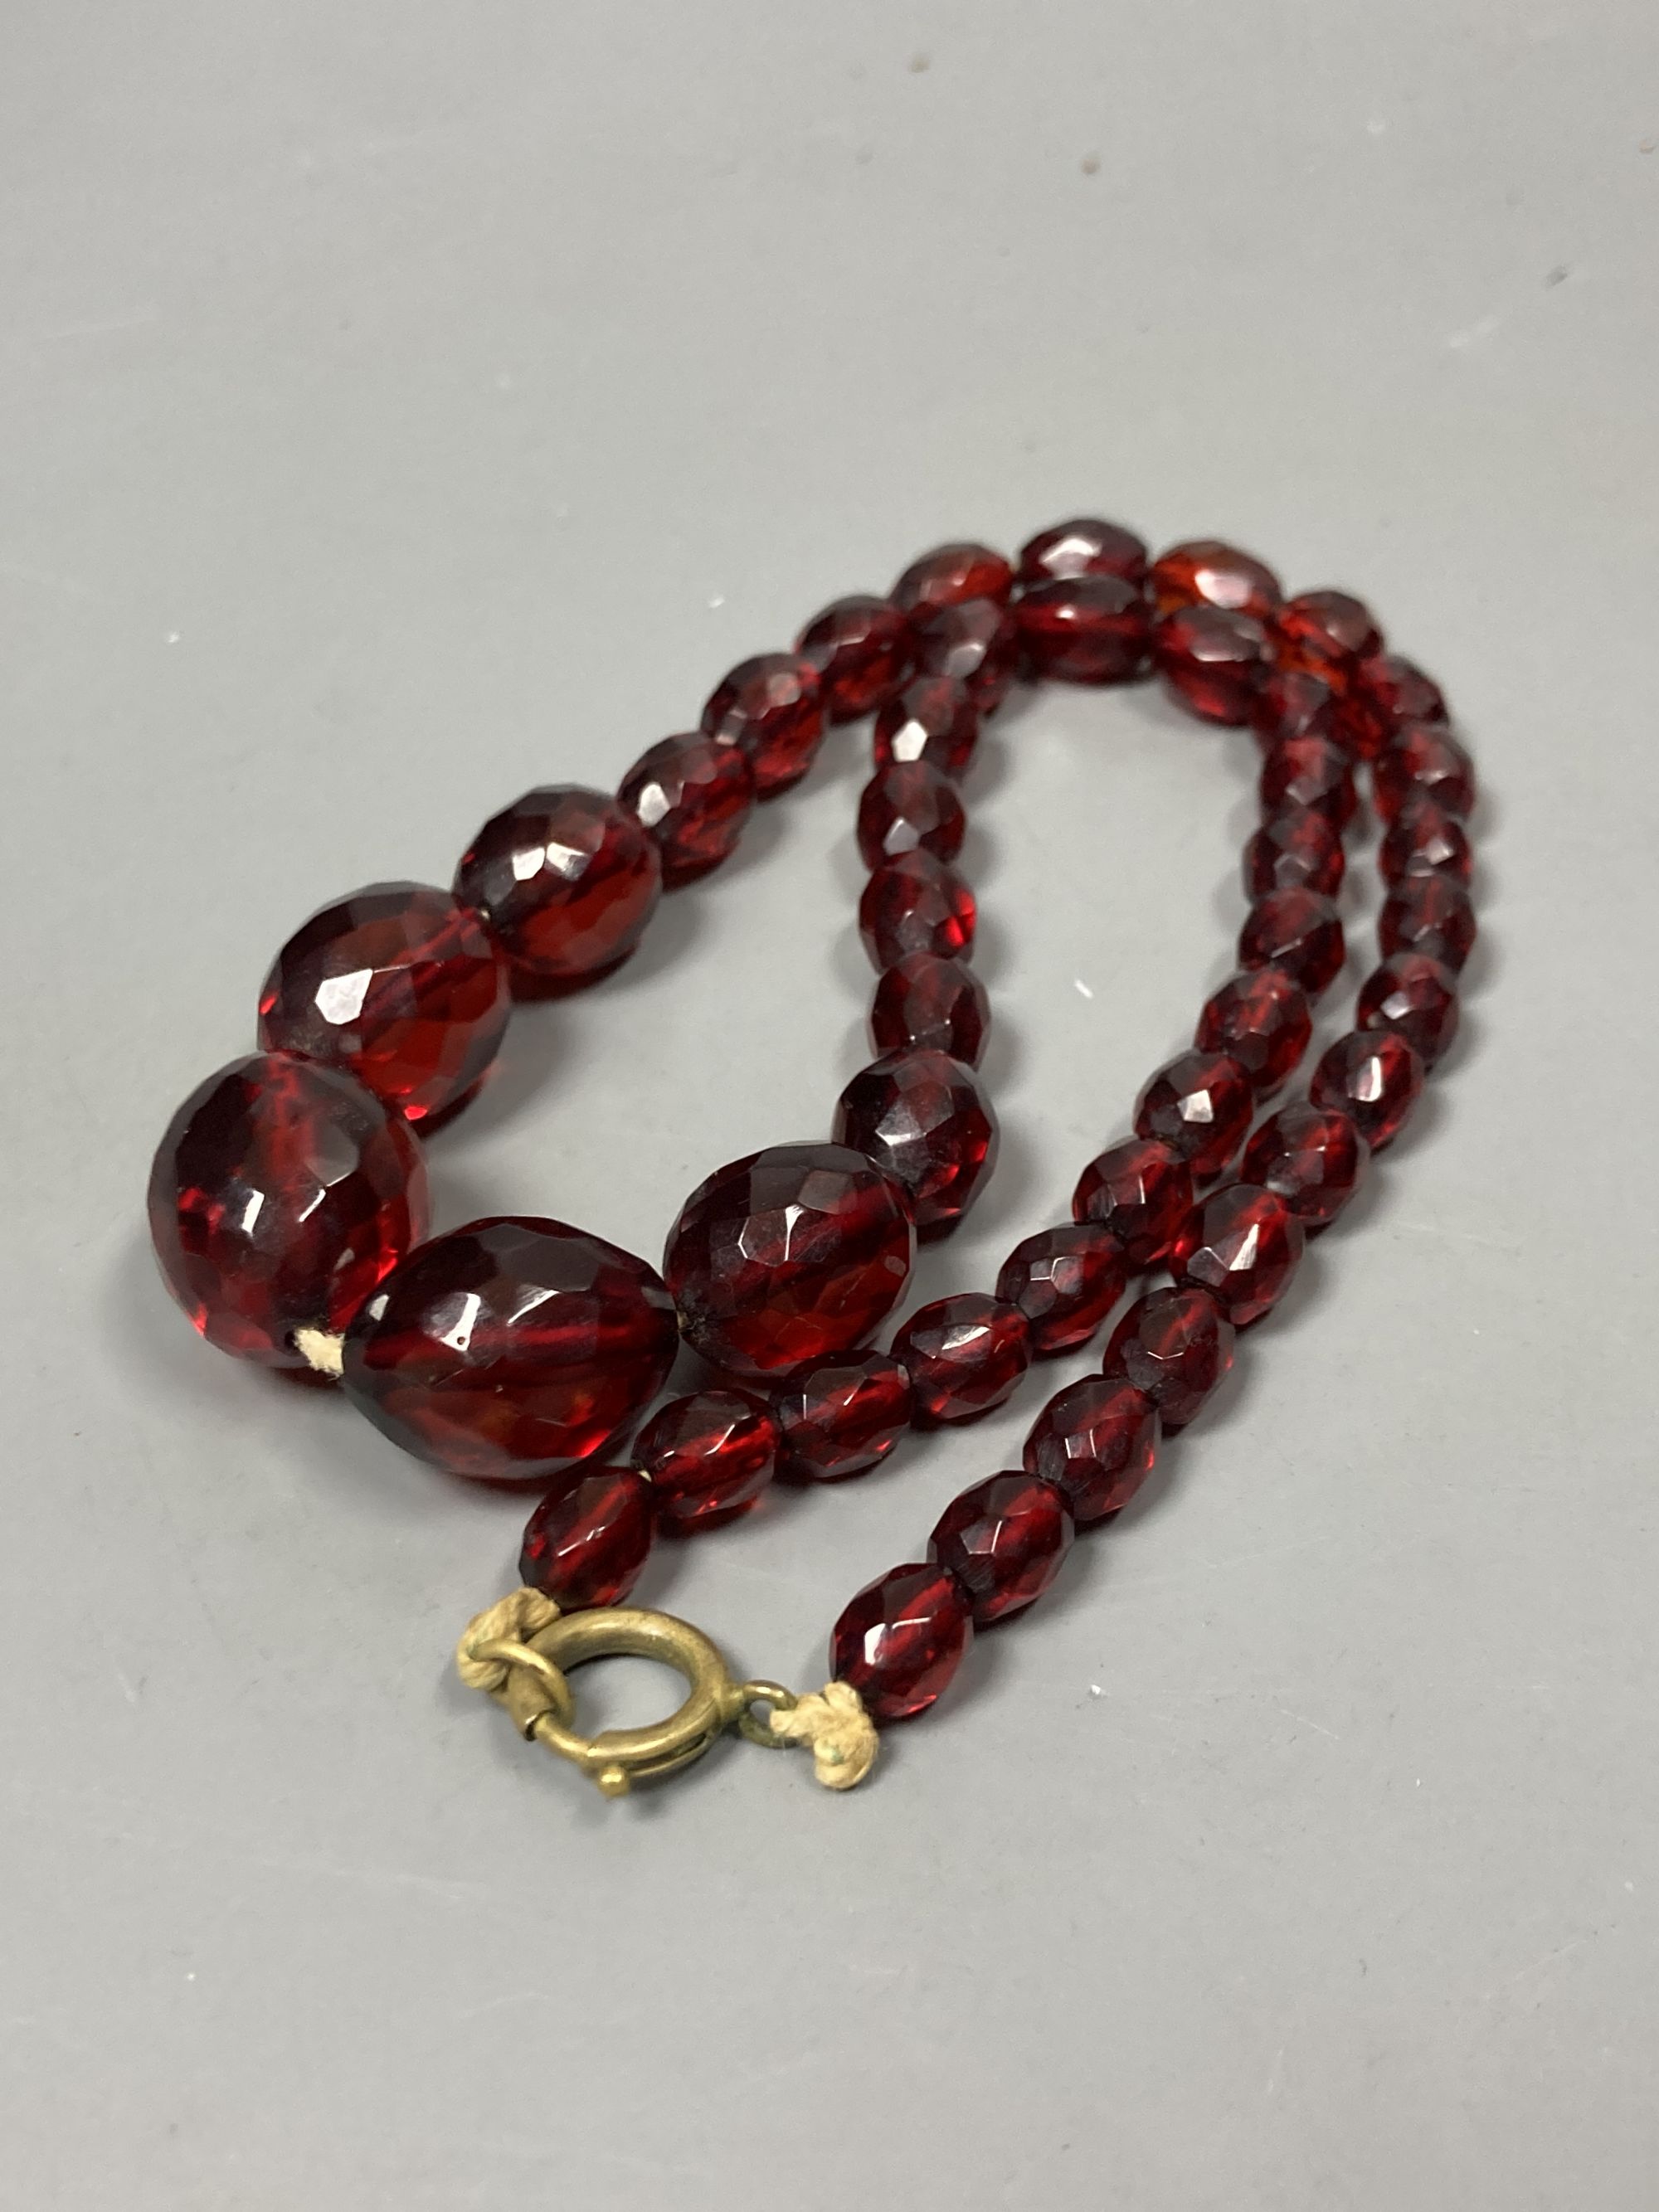 Two transluscent single strand simulated cherry amber bead necklaces, longest 82cm, gross weight 120 grams.